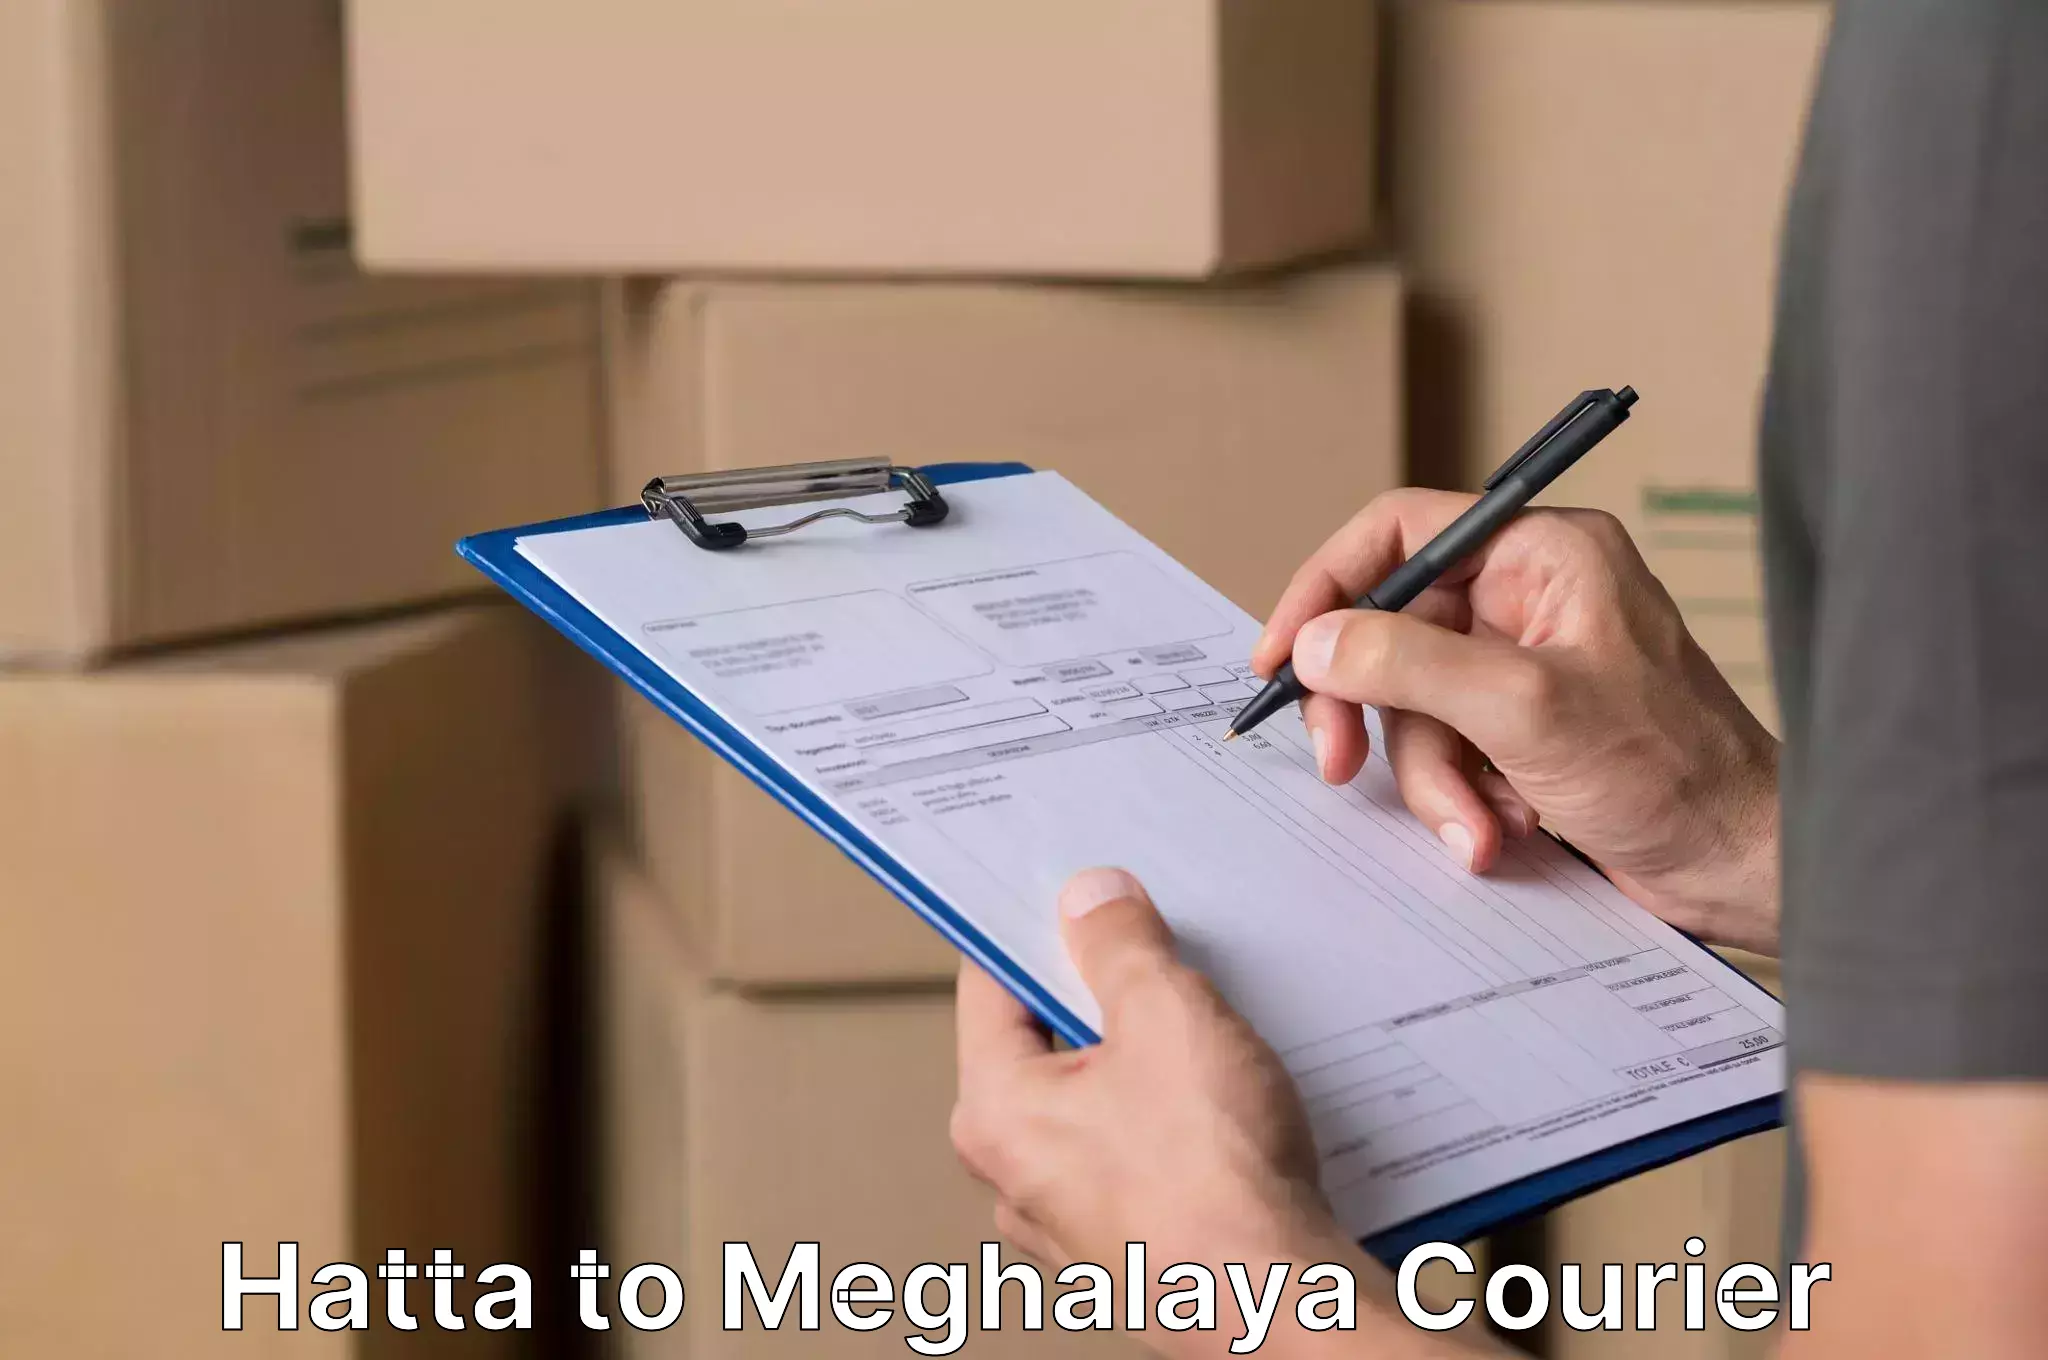 Trusted relocation experts Hatta to Meghalaya